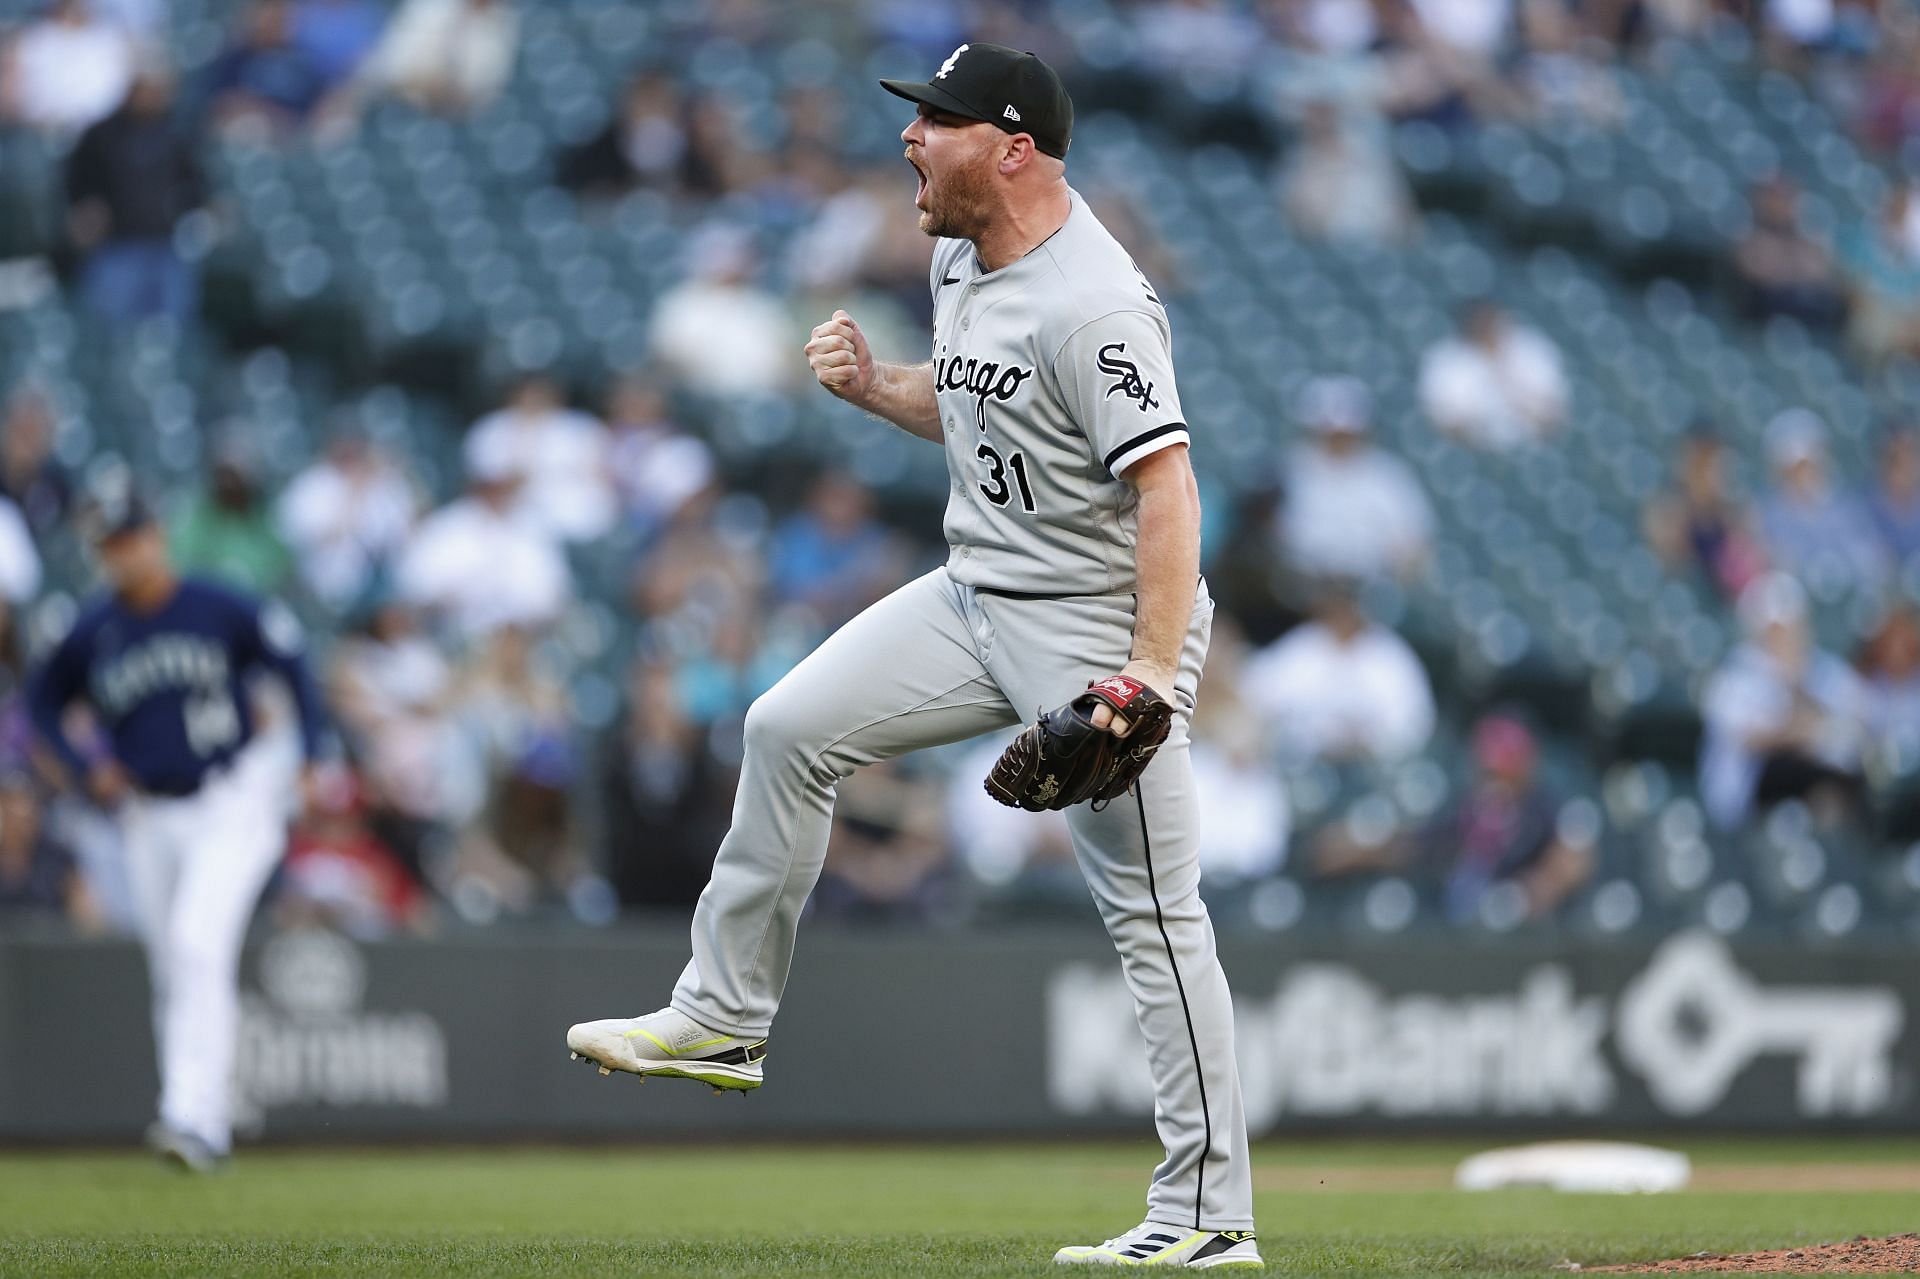 White Sox's Liam Hendriks gets first win since cancer battle